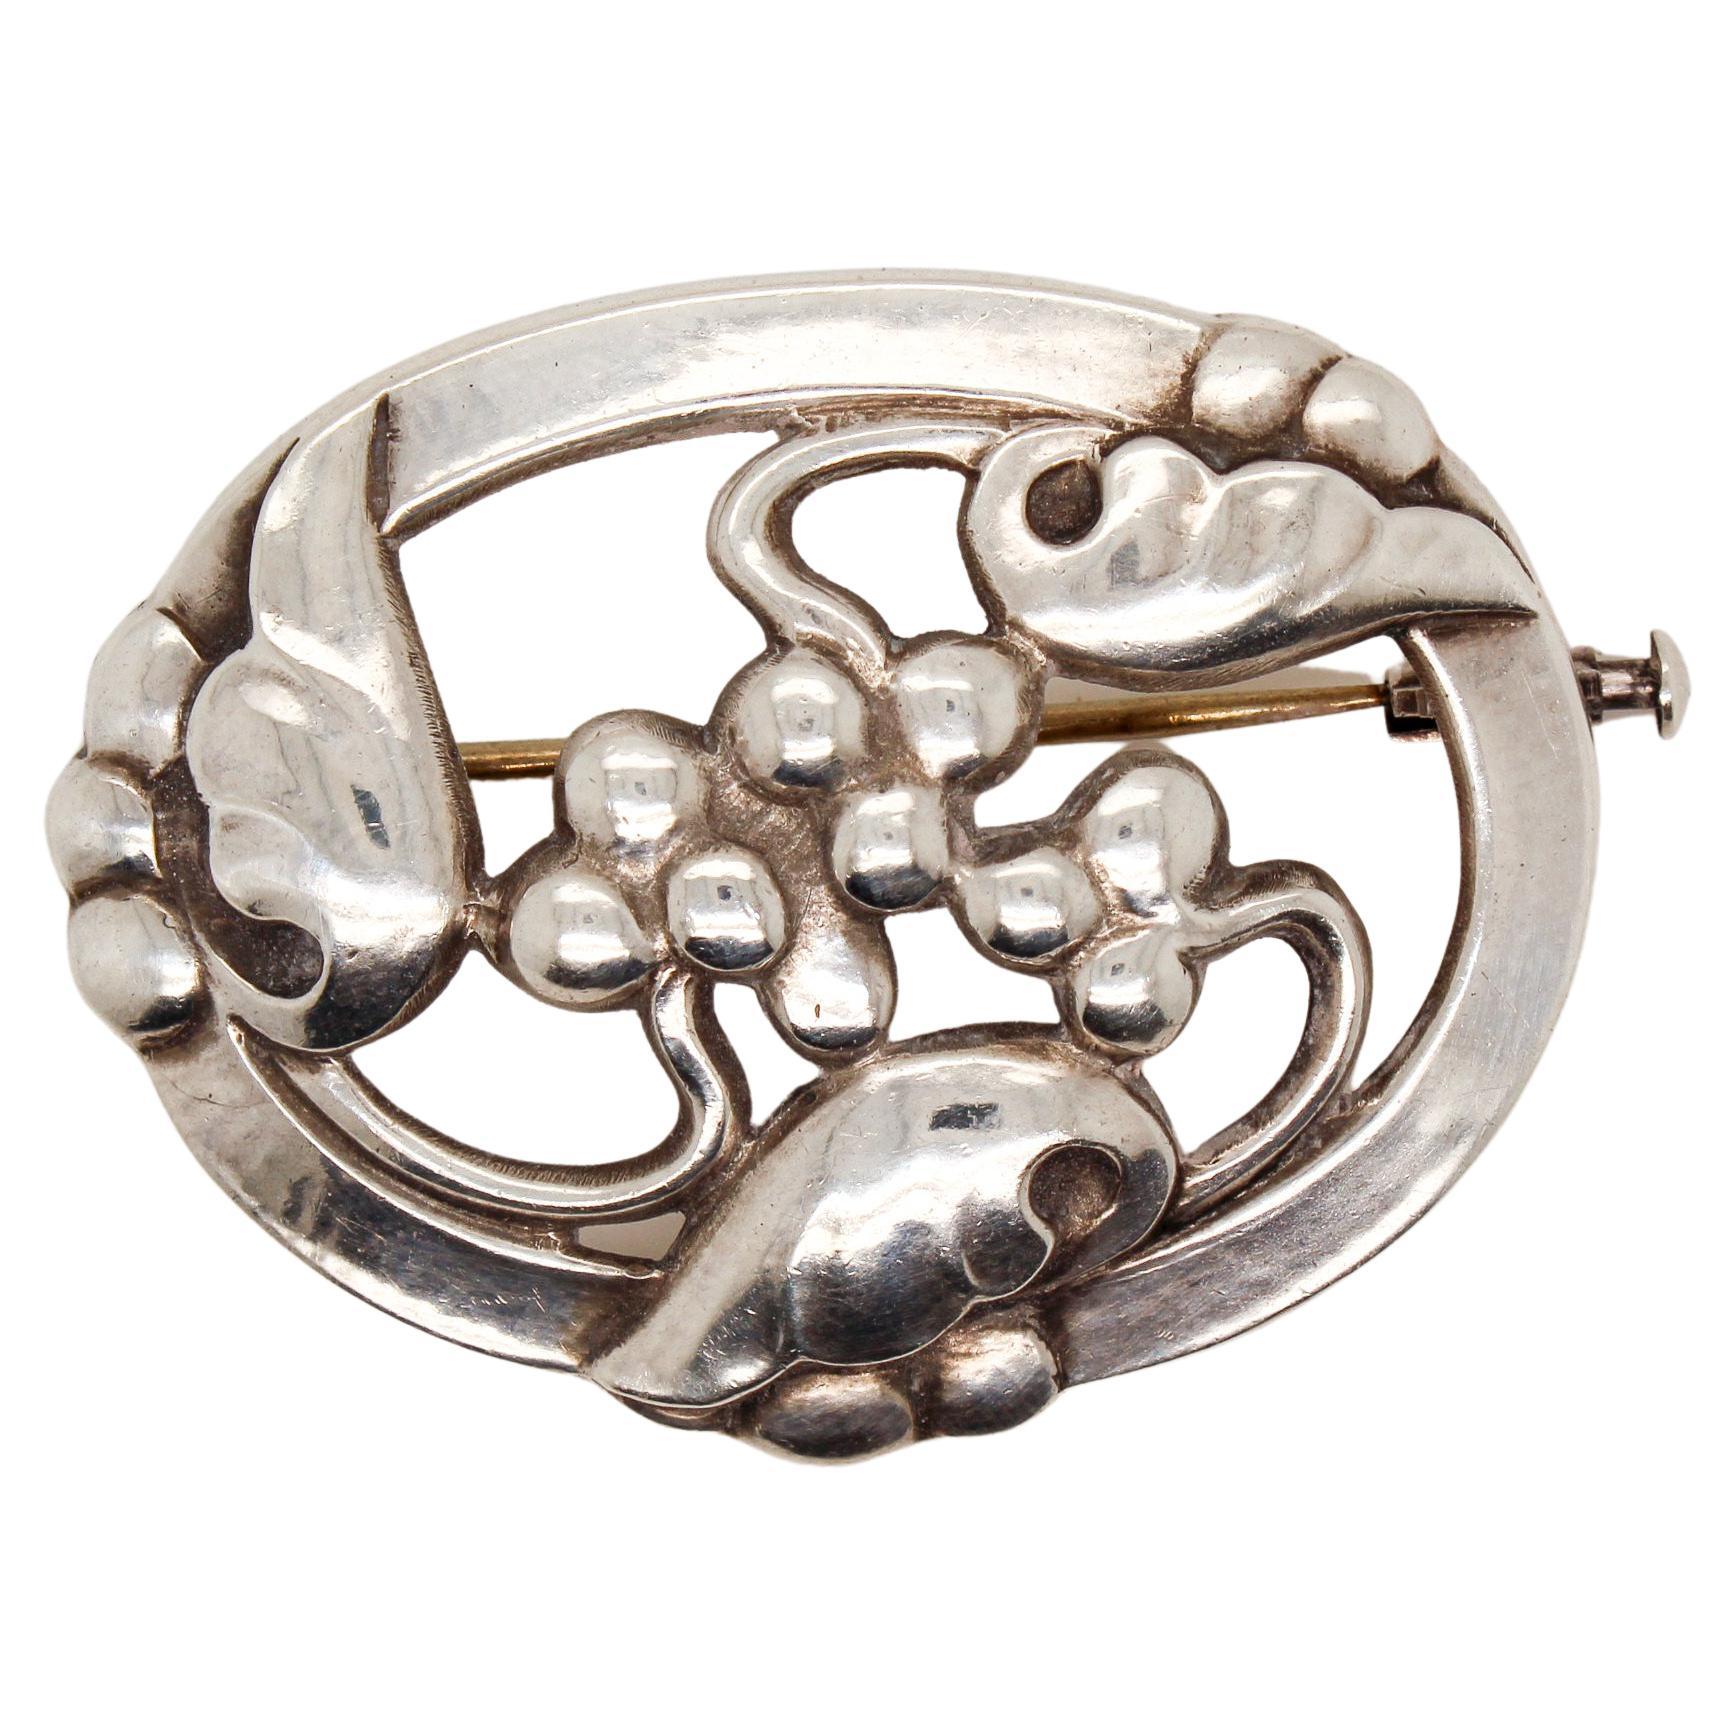 Antique Art Deco Georg Jensen Moonlight Grapes Brooch or Pin No. 101 For Sale